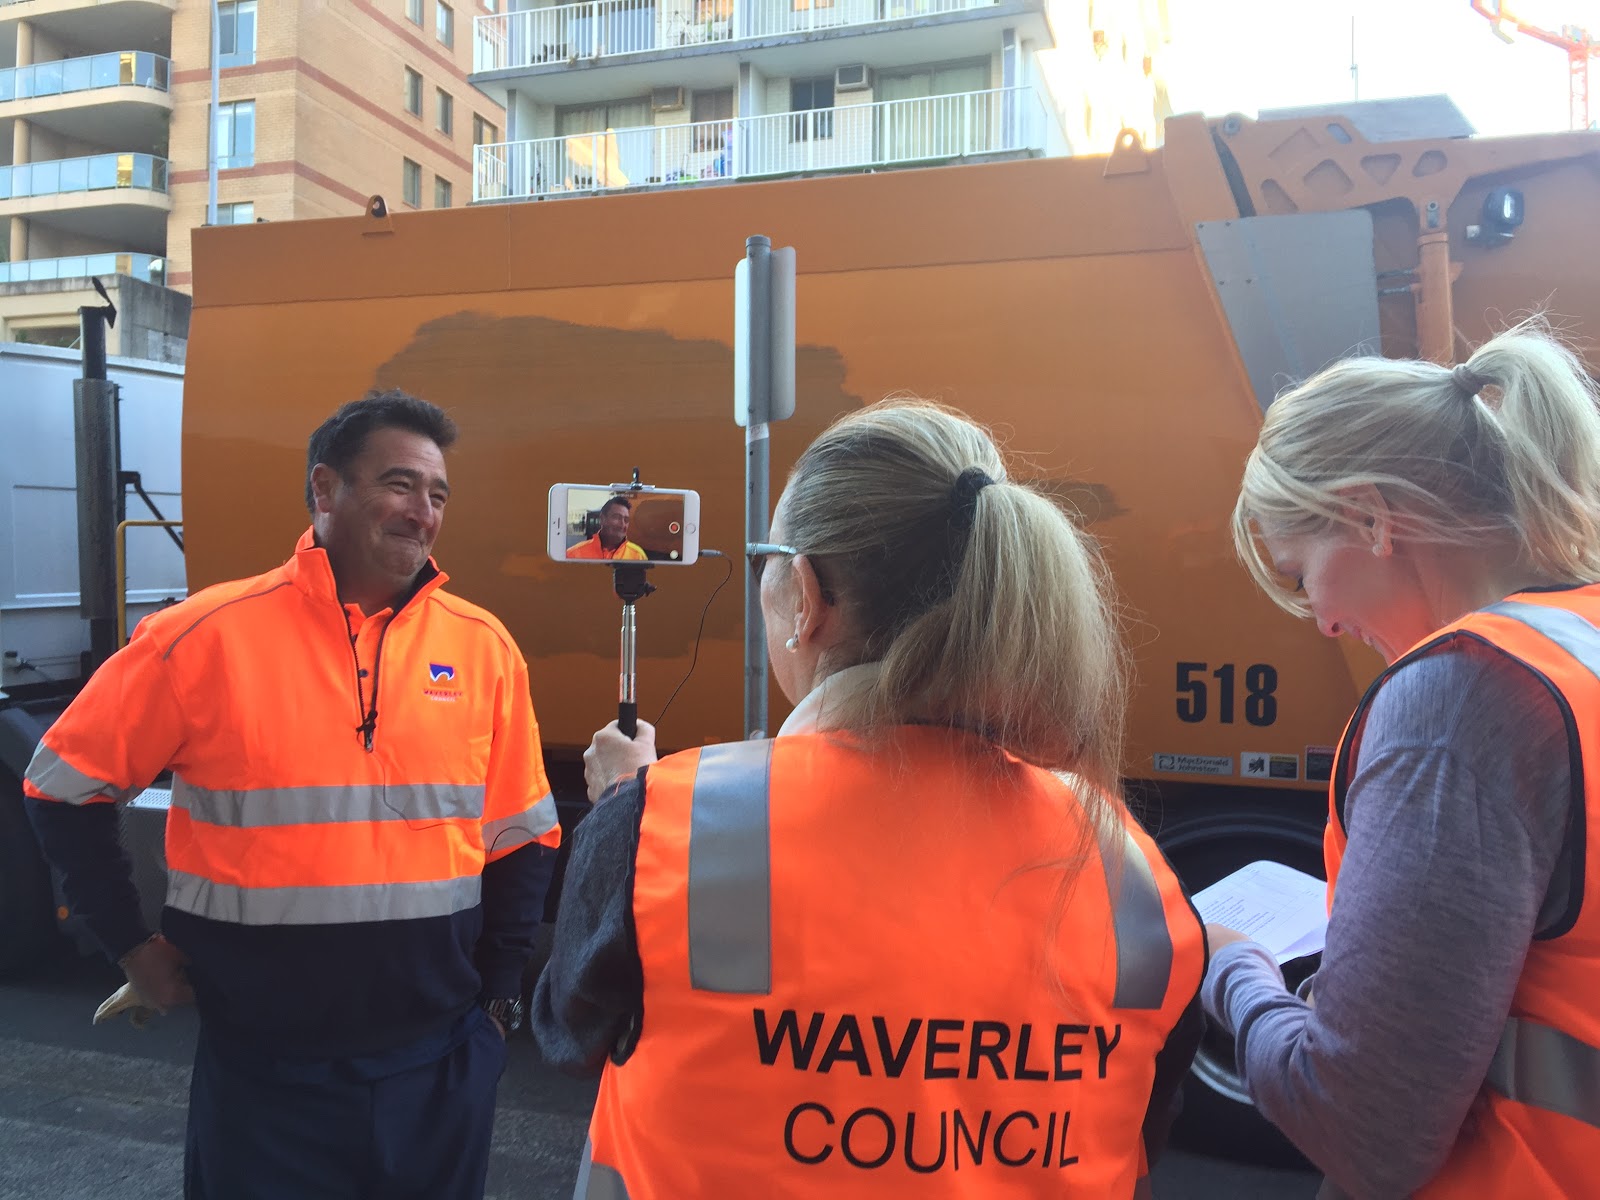 Two staff members from Waverley Council, holding a smartphone and interviewing a garbage man.